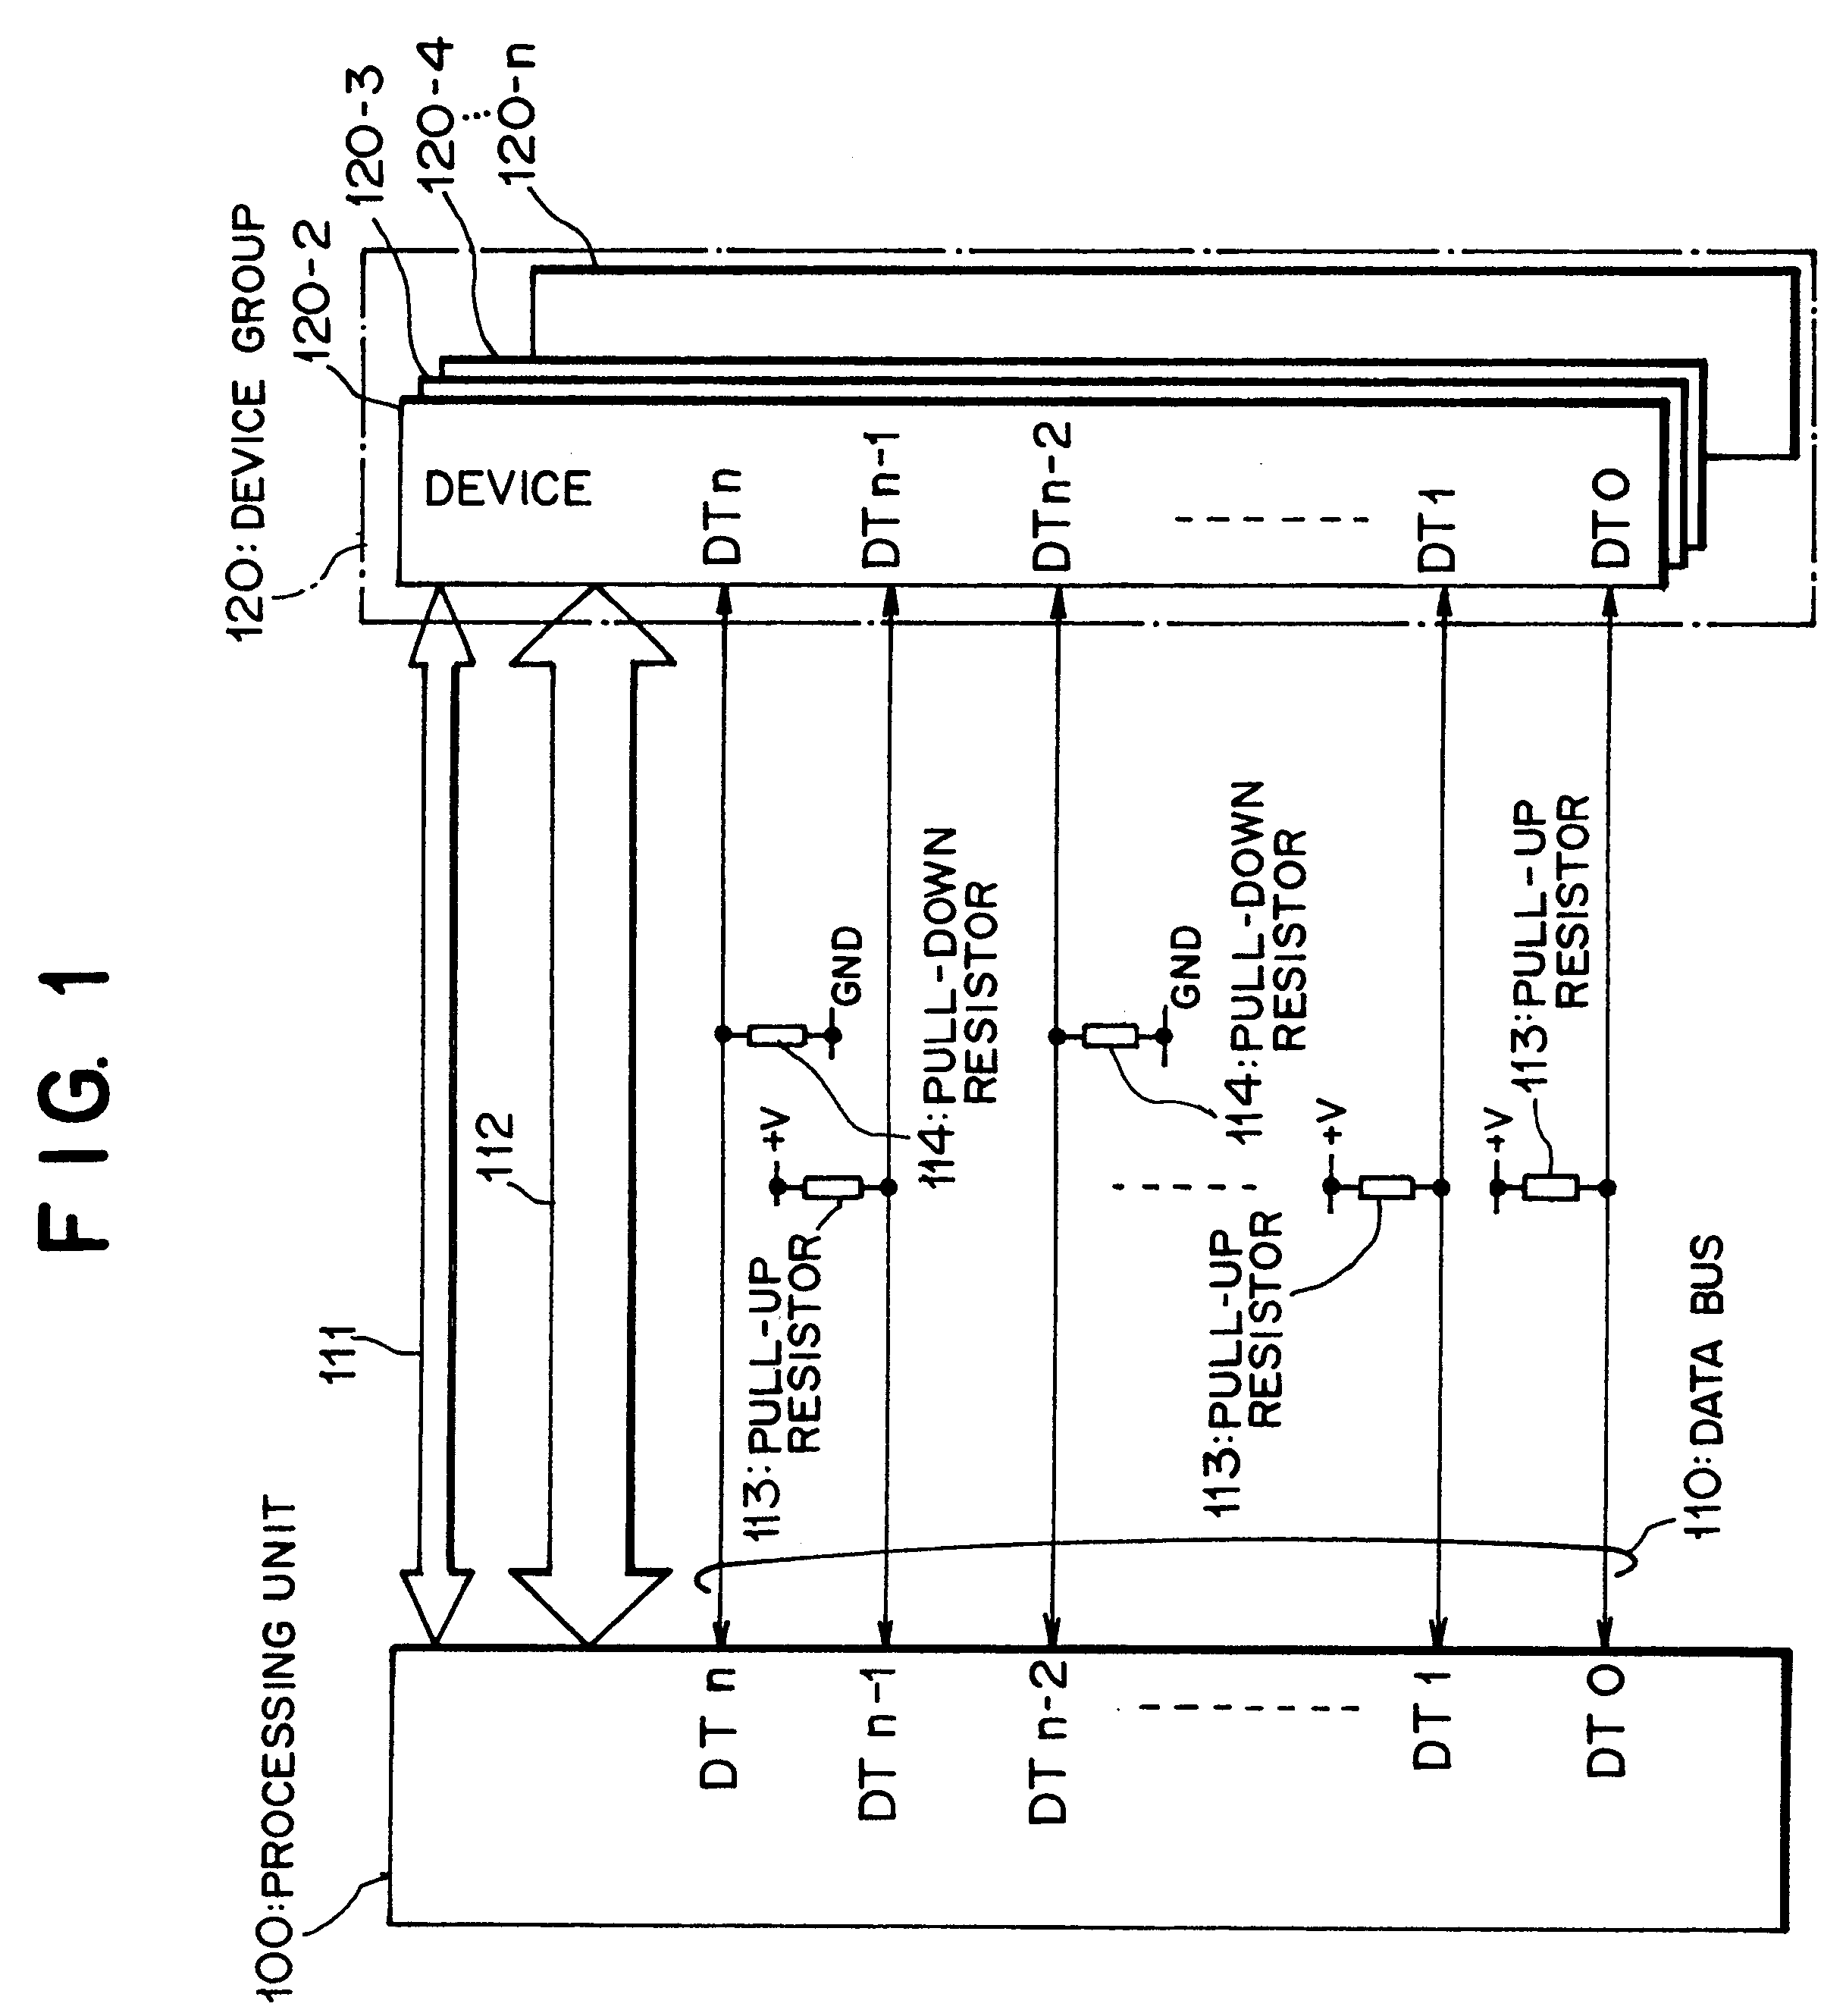 System for recognizing of a device connection state by reading structure information data which produced by pull-up resistor and pull-down resistor